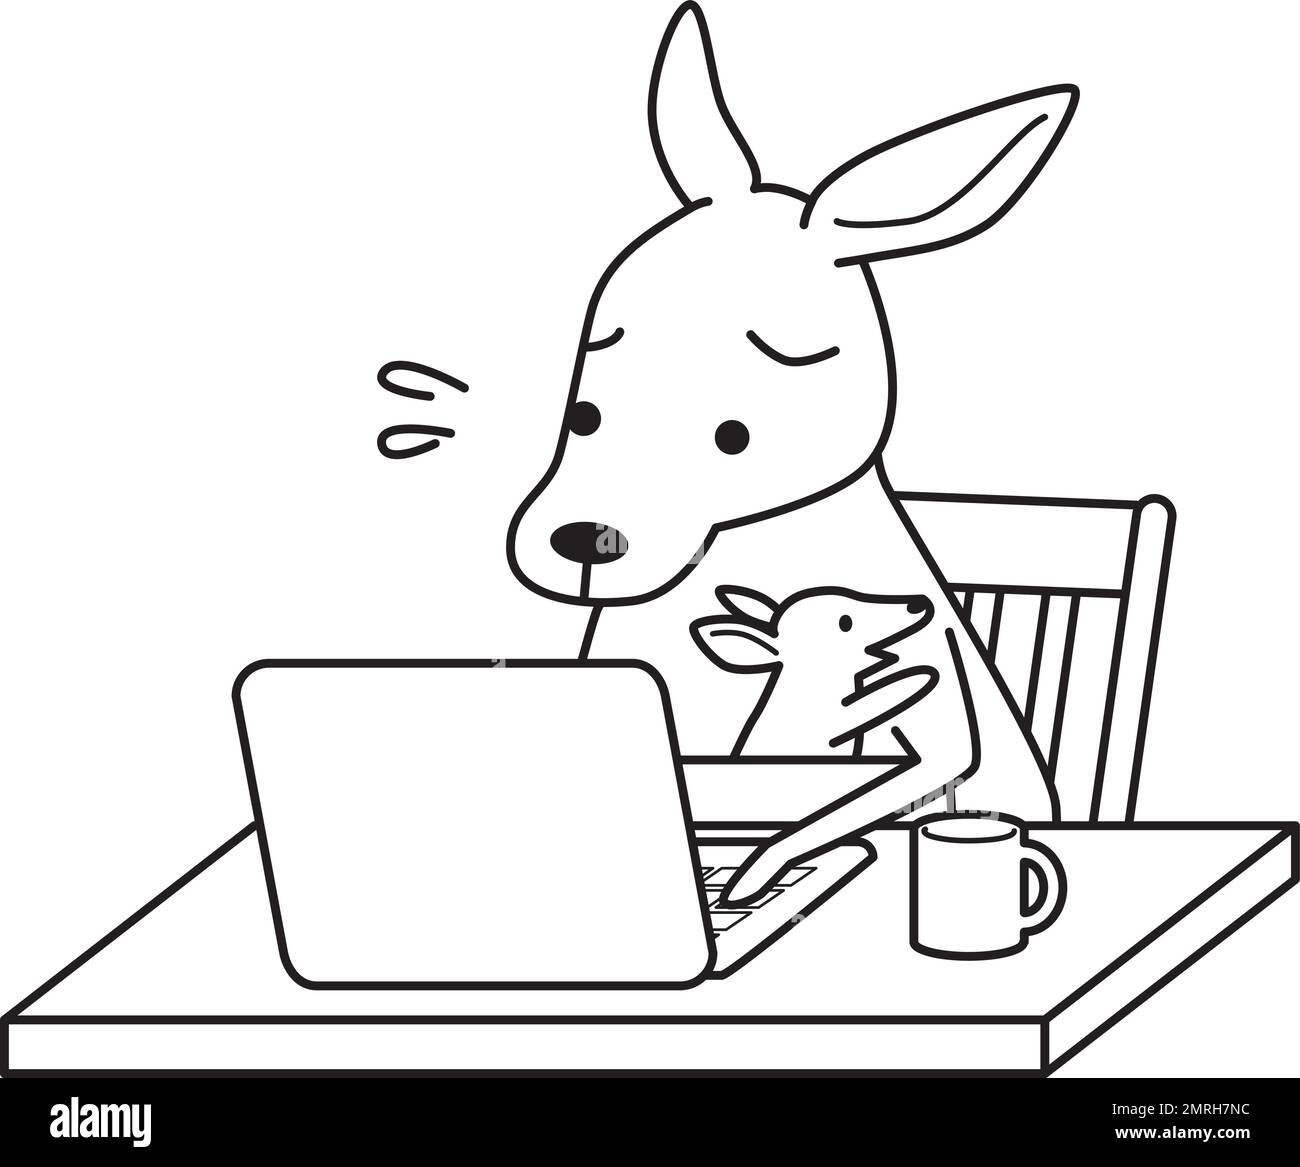 Kangaroos raising children working from home. Black and white line drawing. Humorous animal illustrations. Stock Vector